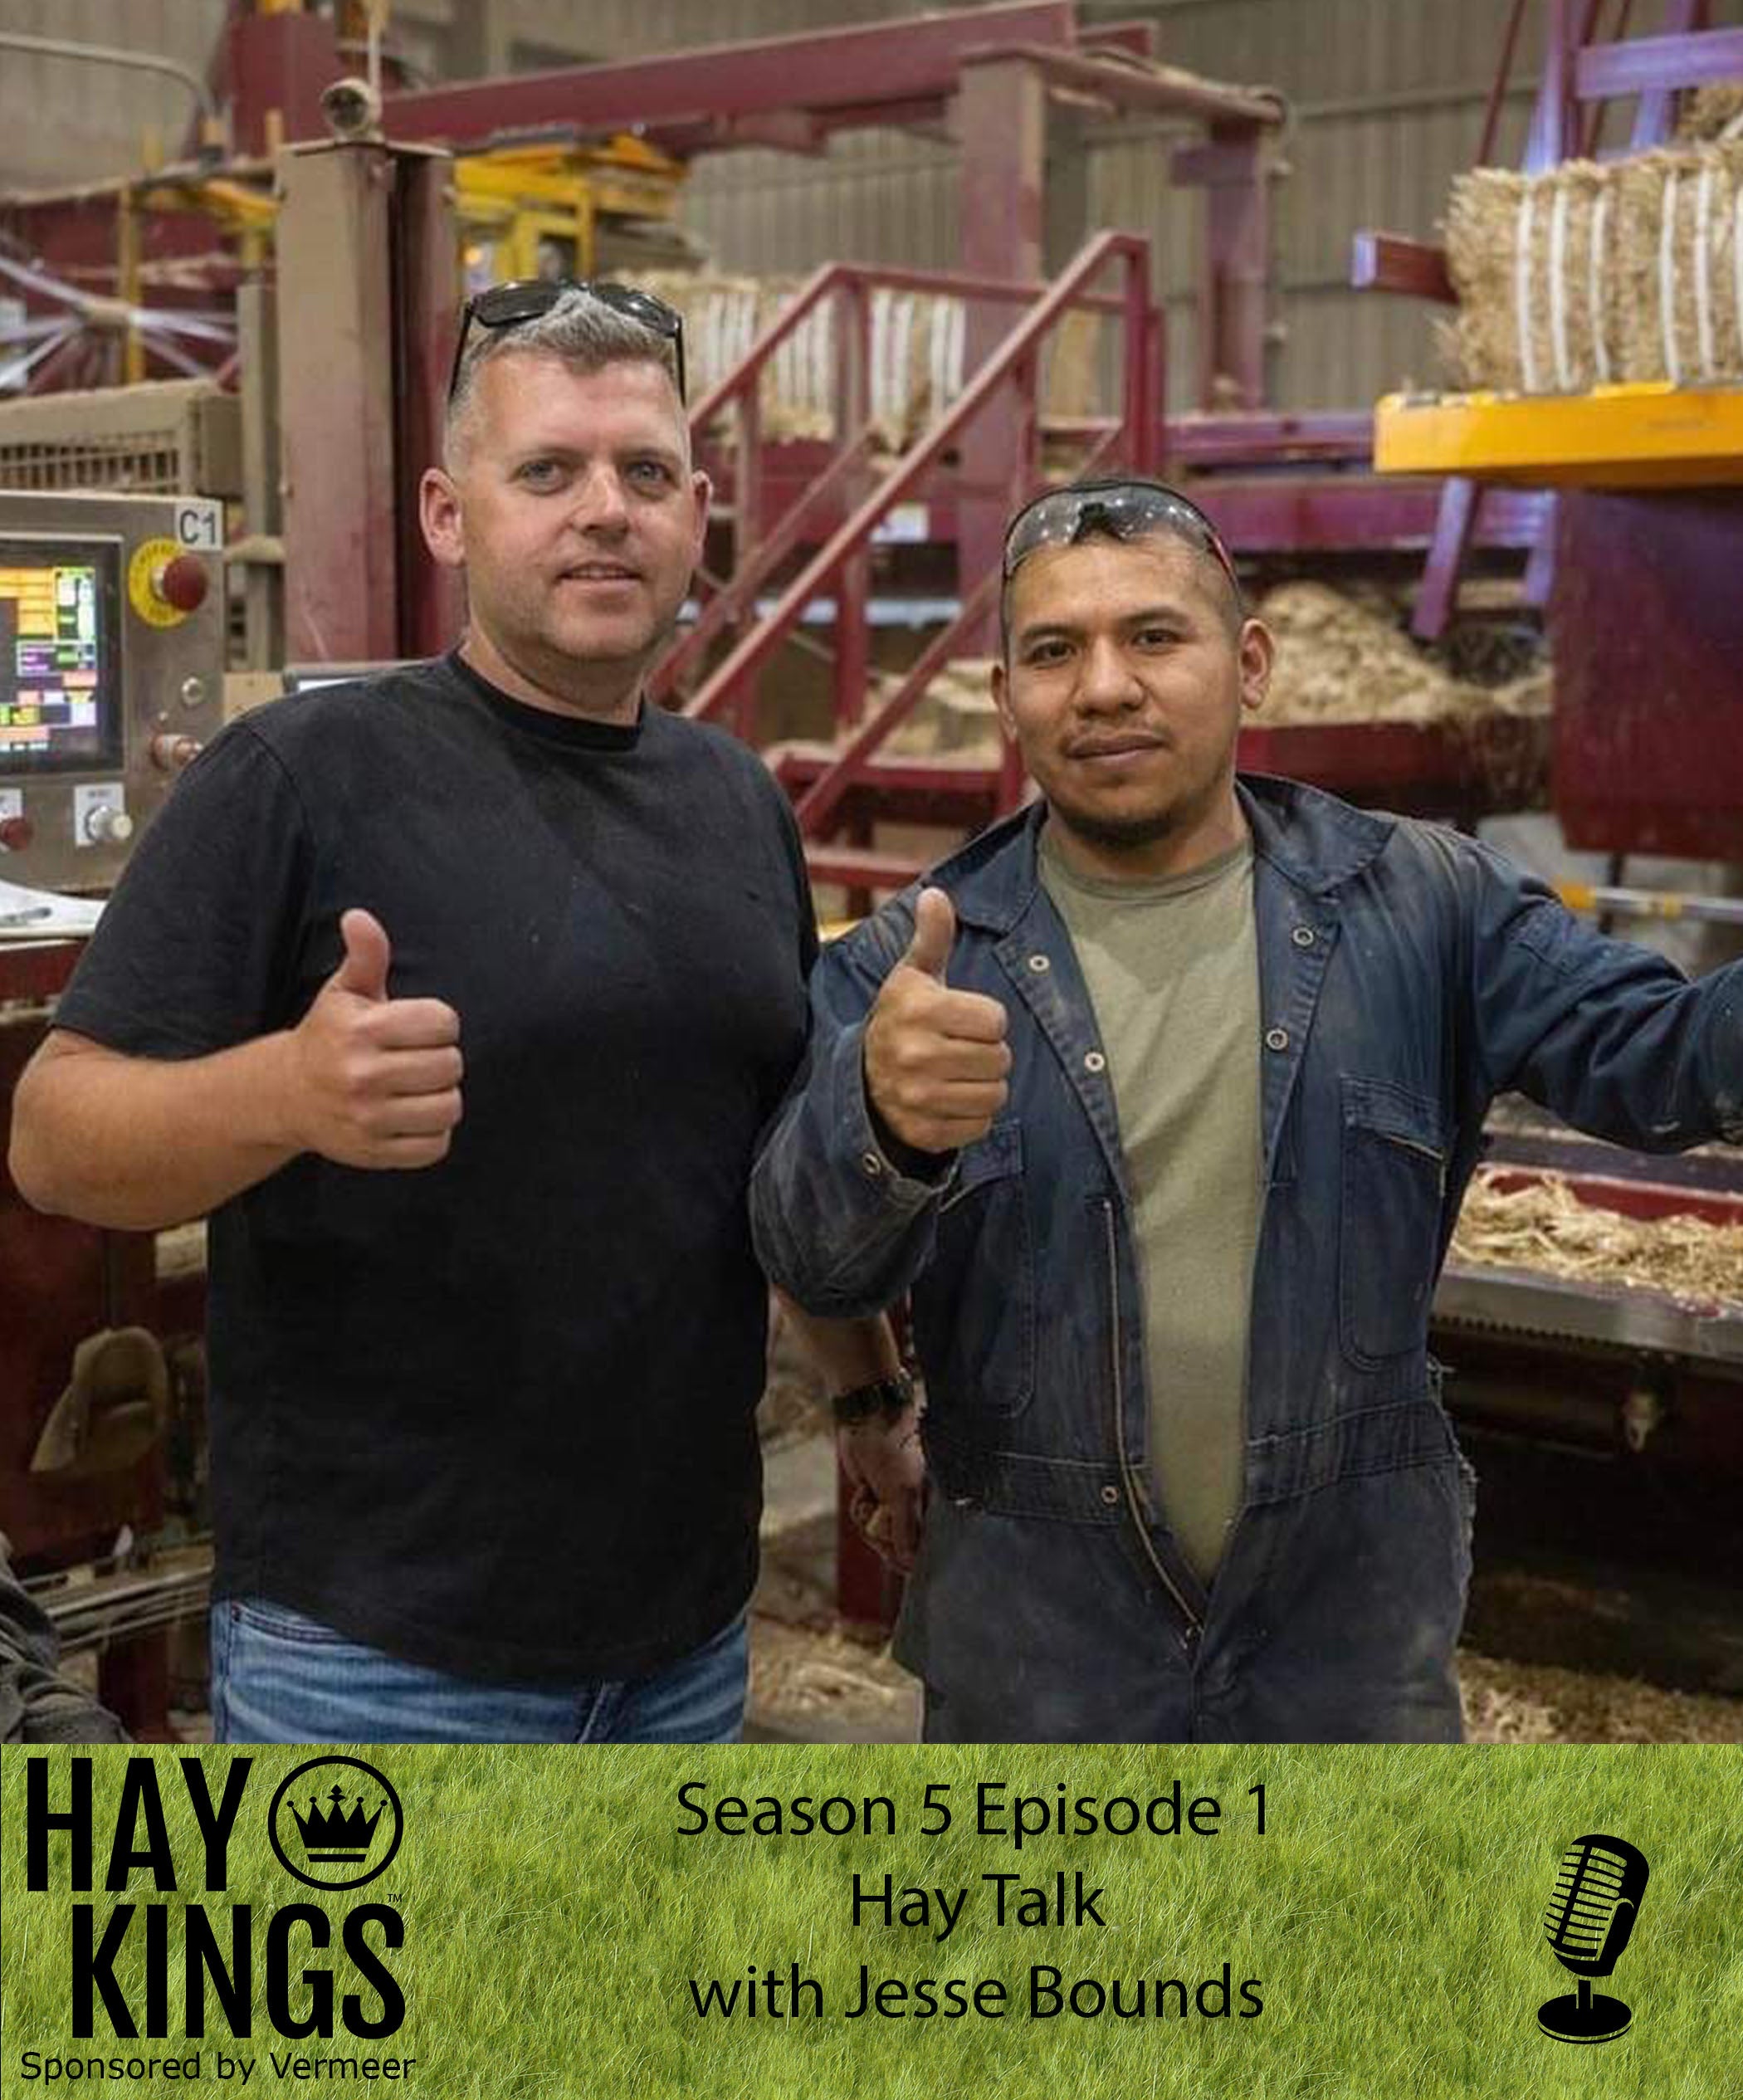 Hay Kings Podcast: Hay Talk With Jesse Bounds